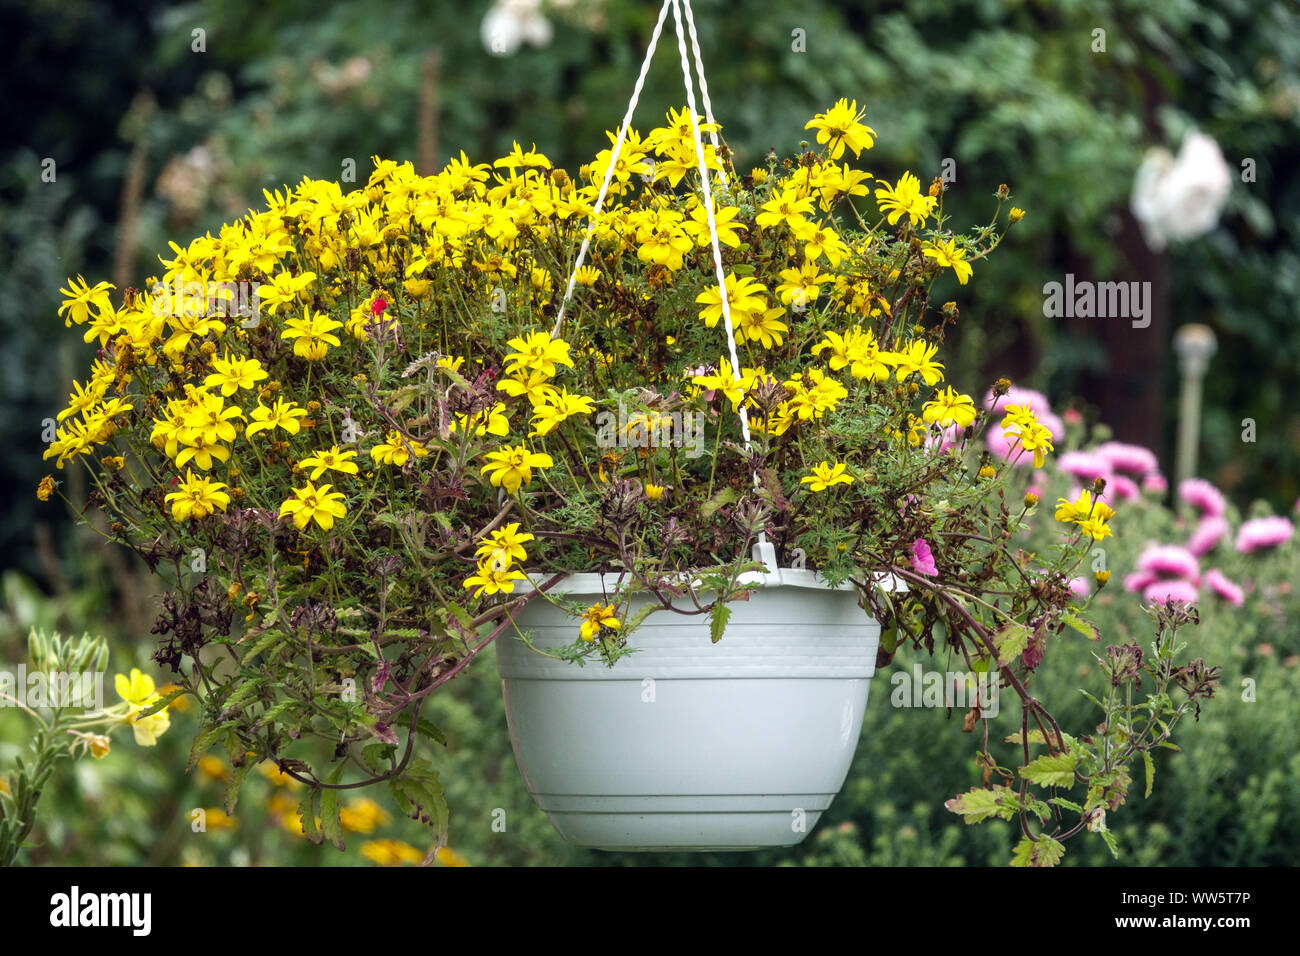 Yellow flowers, plants in hanging pot in a garden Stock Photo